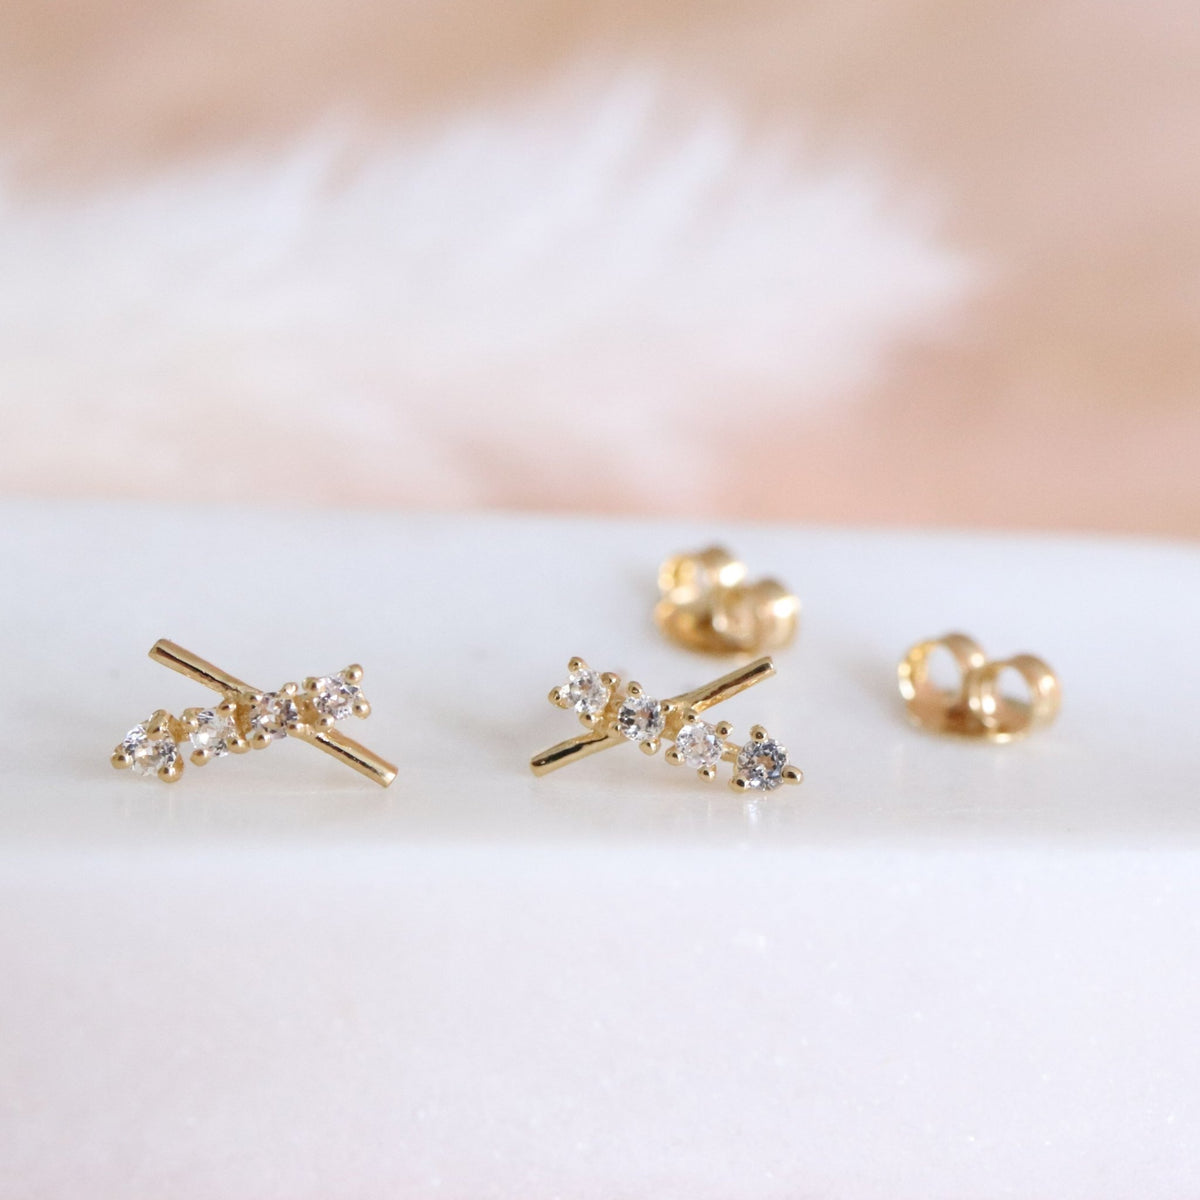 TINY DREAM STARDUST STUDS - CUBIC ZIRCONIA &amp; GOLD - SO PRETTY CARA COTTER